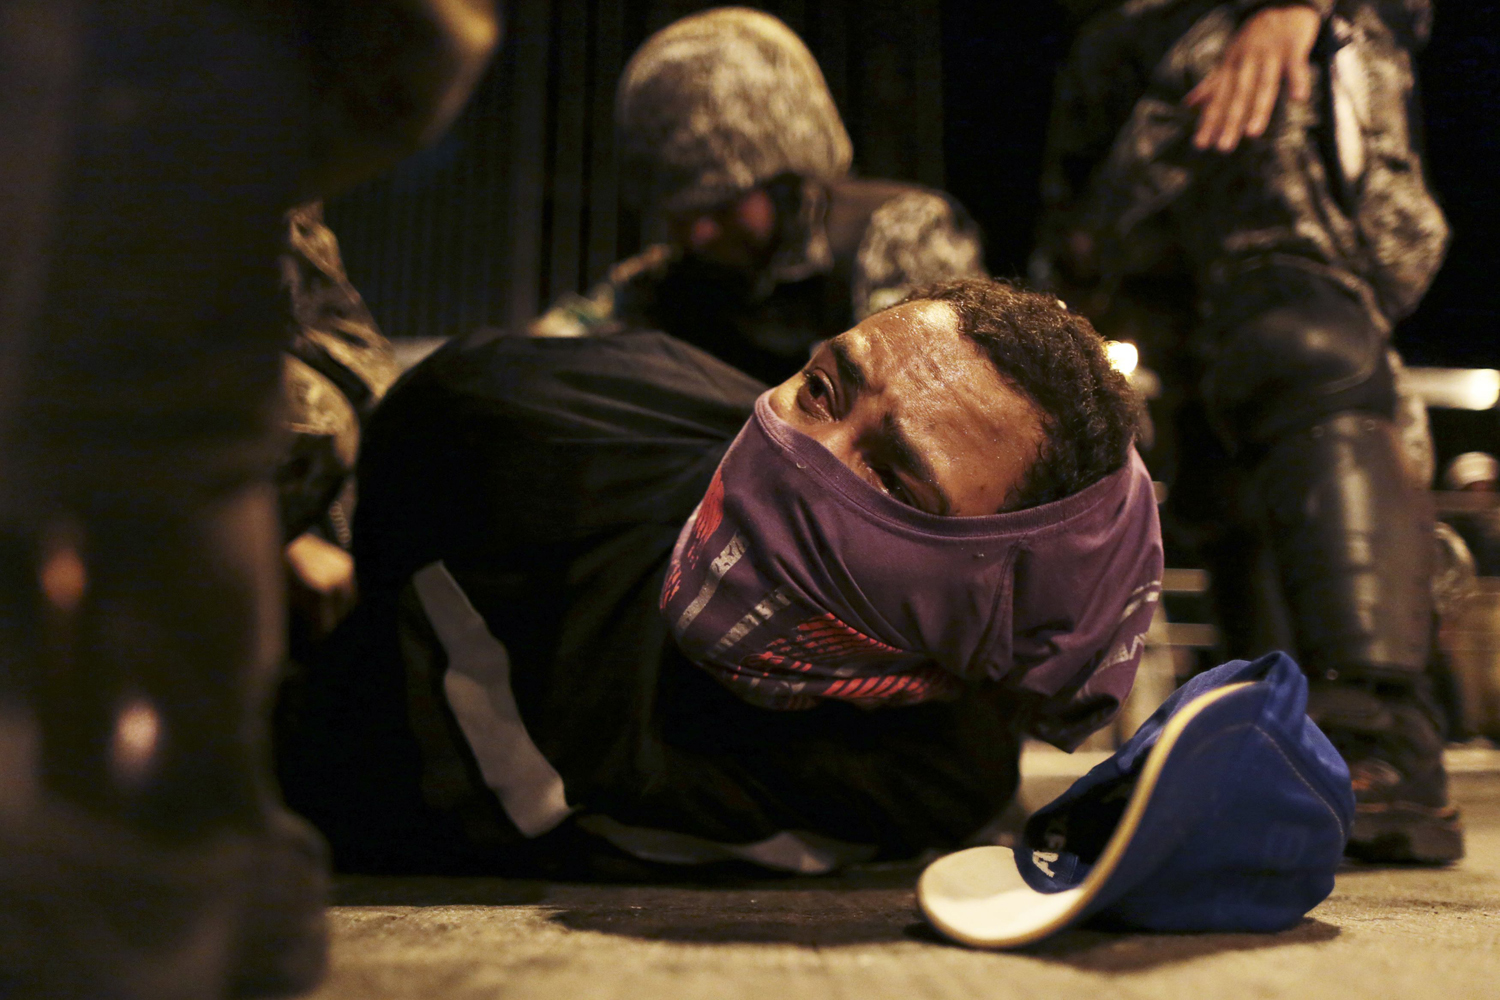 June 26, 2013. A demonstrator is detained by the police during a protest on the streets of Belo Horizonte, Brazil.